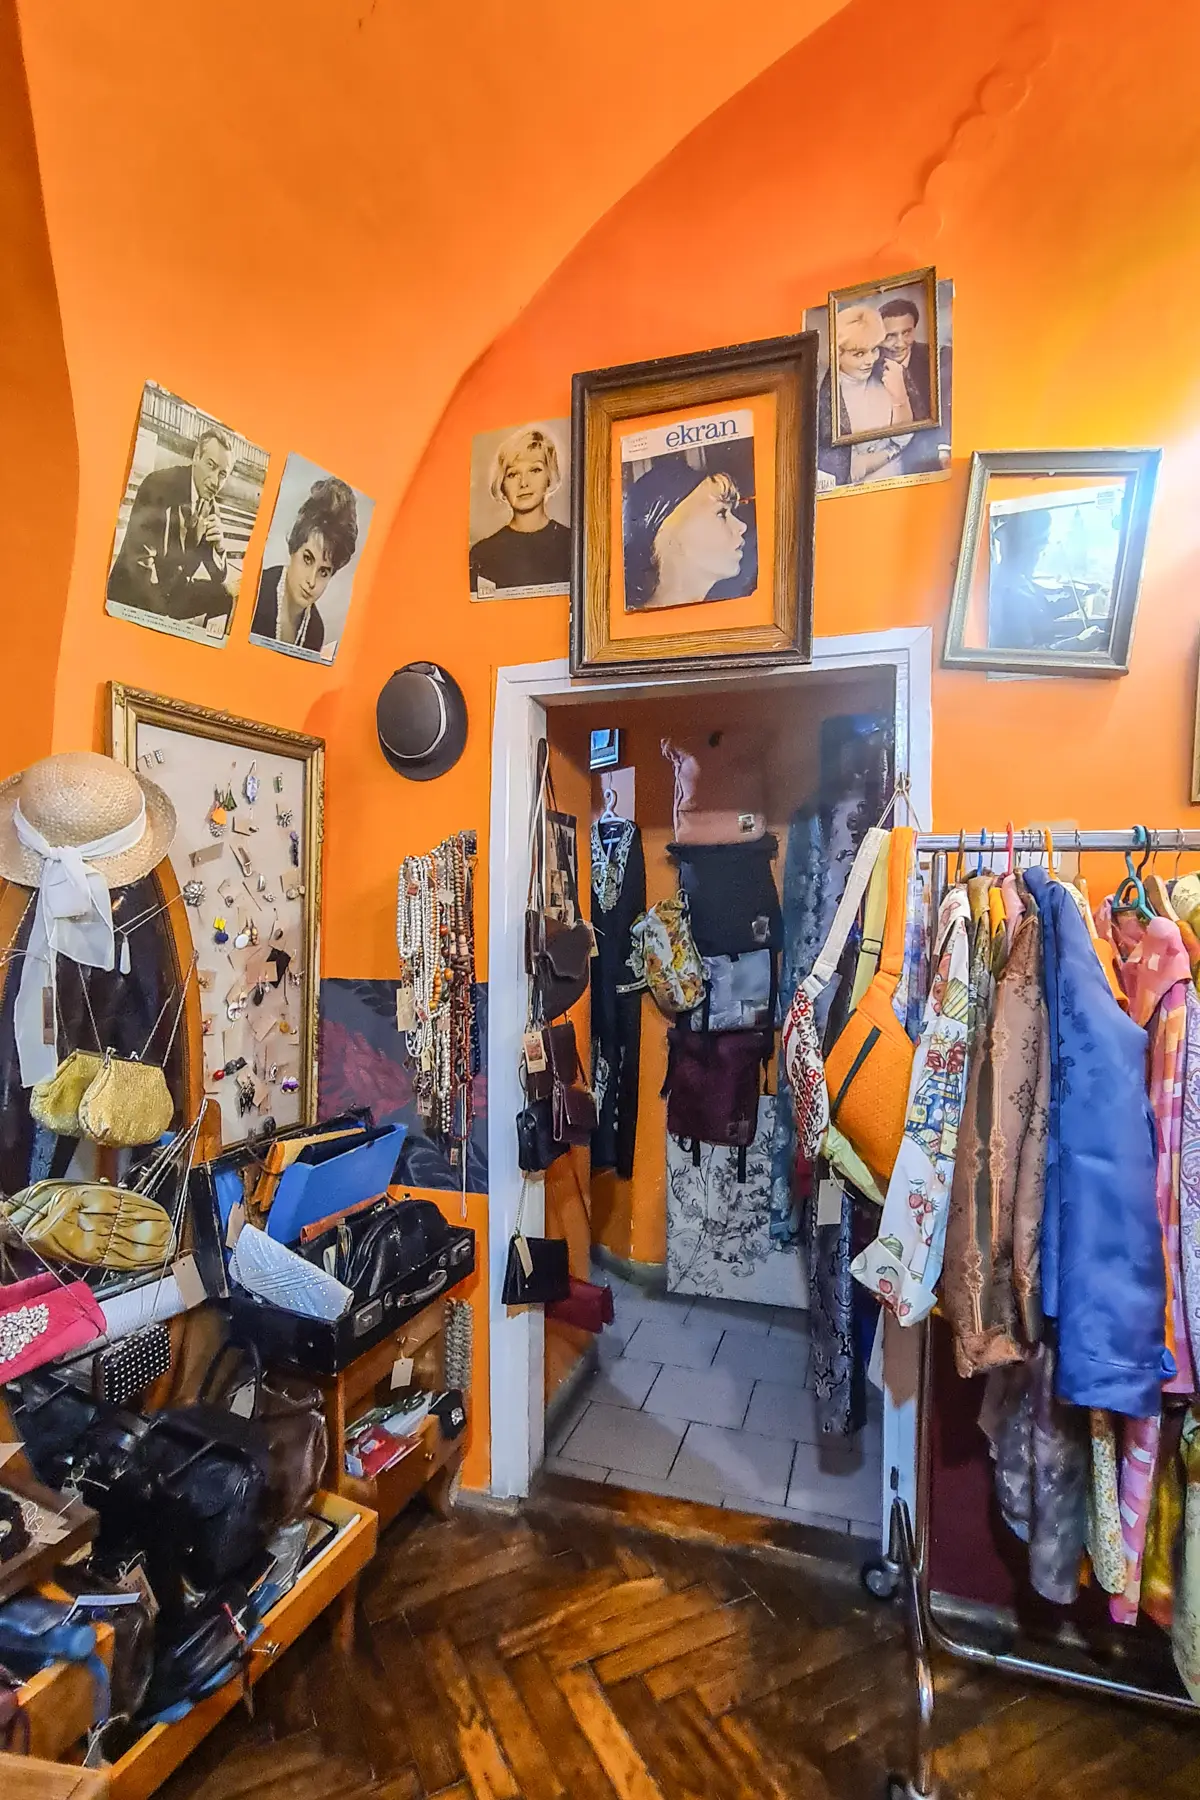 Inside on an orange vintage shop with pictures, purses and hats on the wall with racks of clothing, Inspiro Vintage shop in Kazimierz.